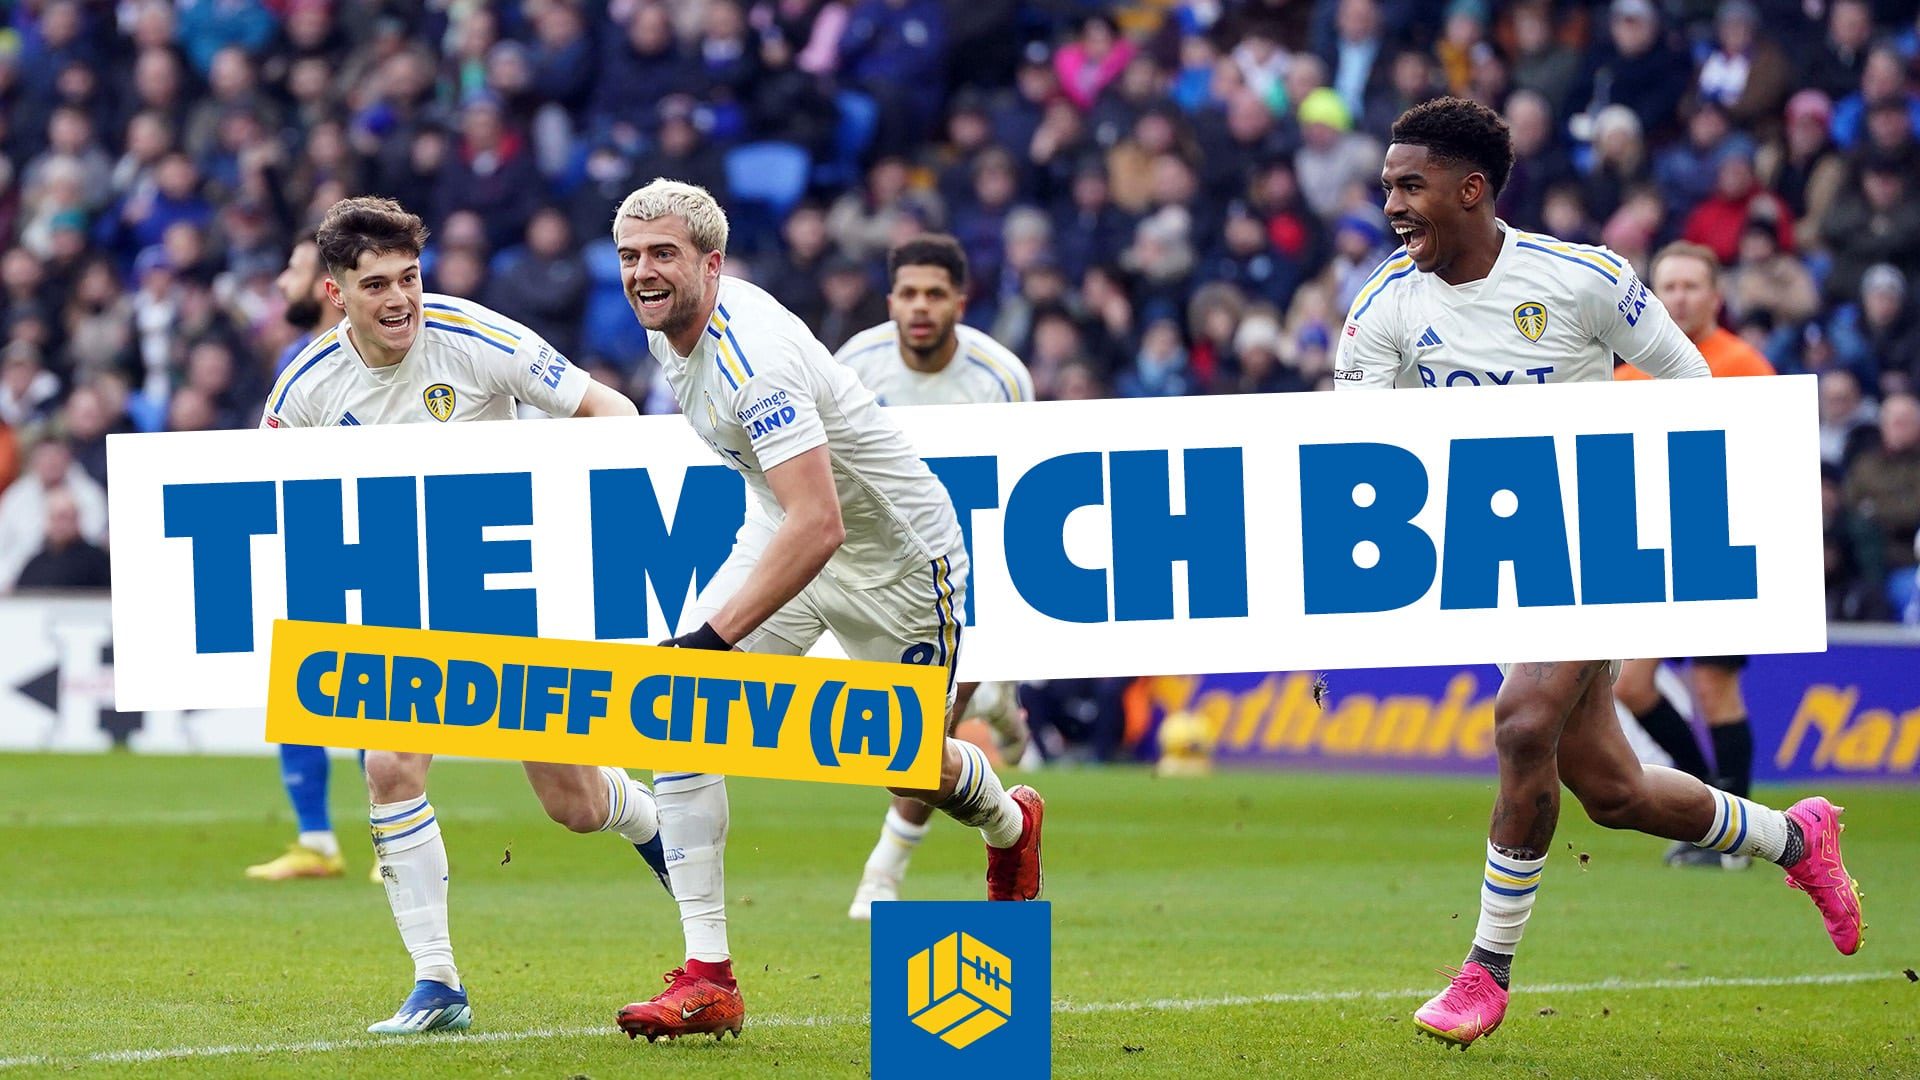 Leeds United 1-0 Norwich City: Back to back • The Square Ball